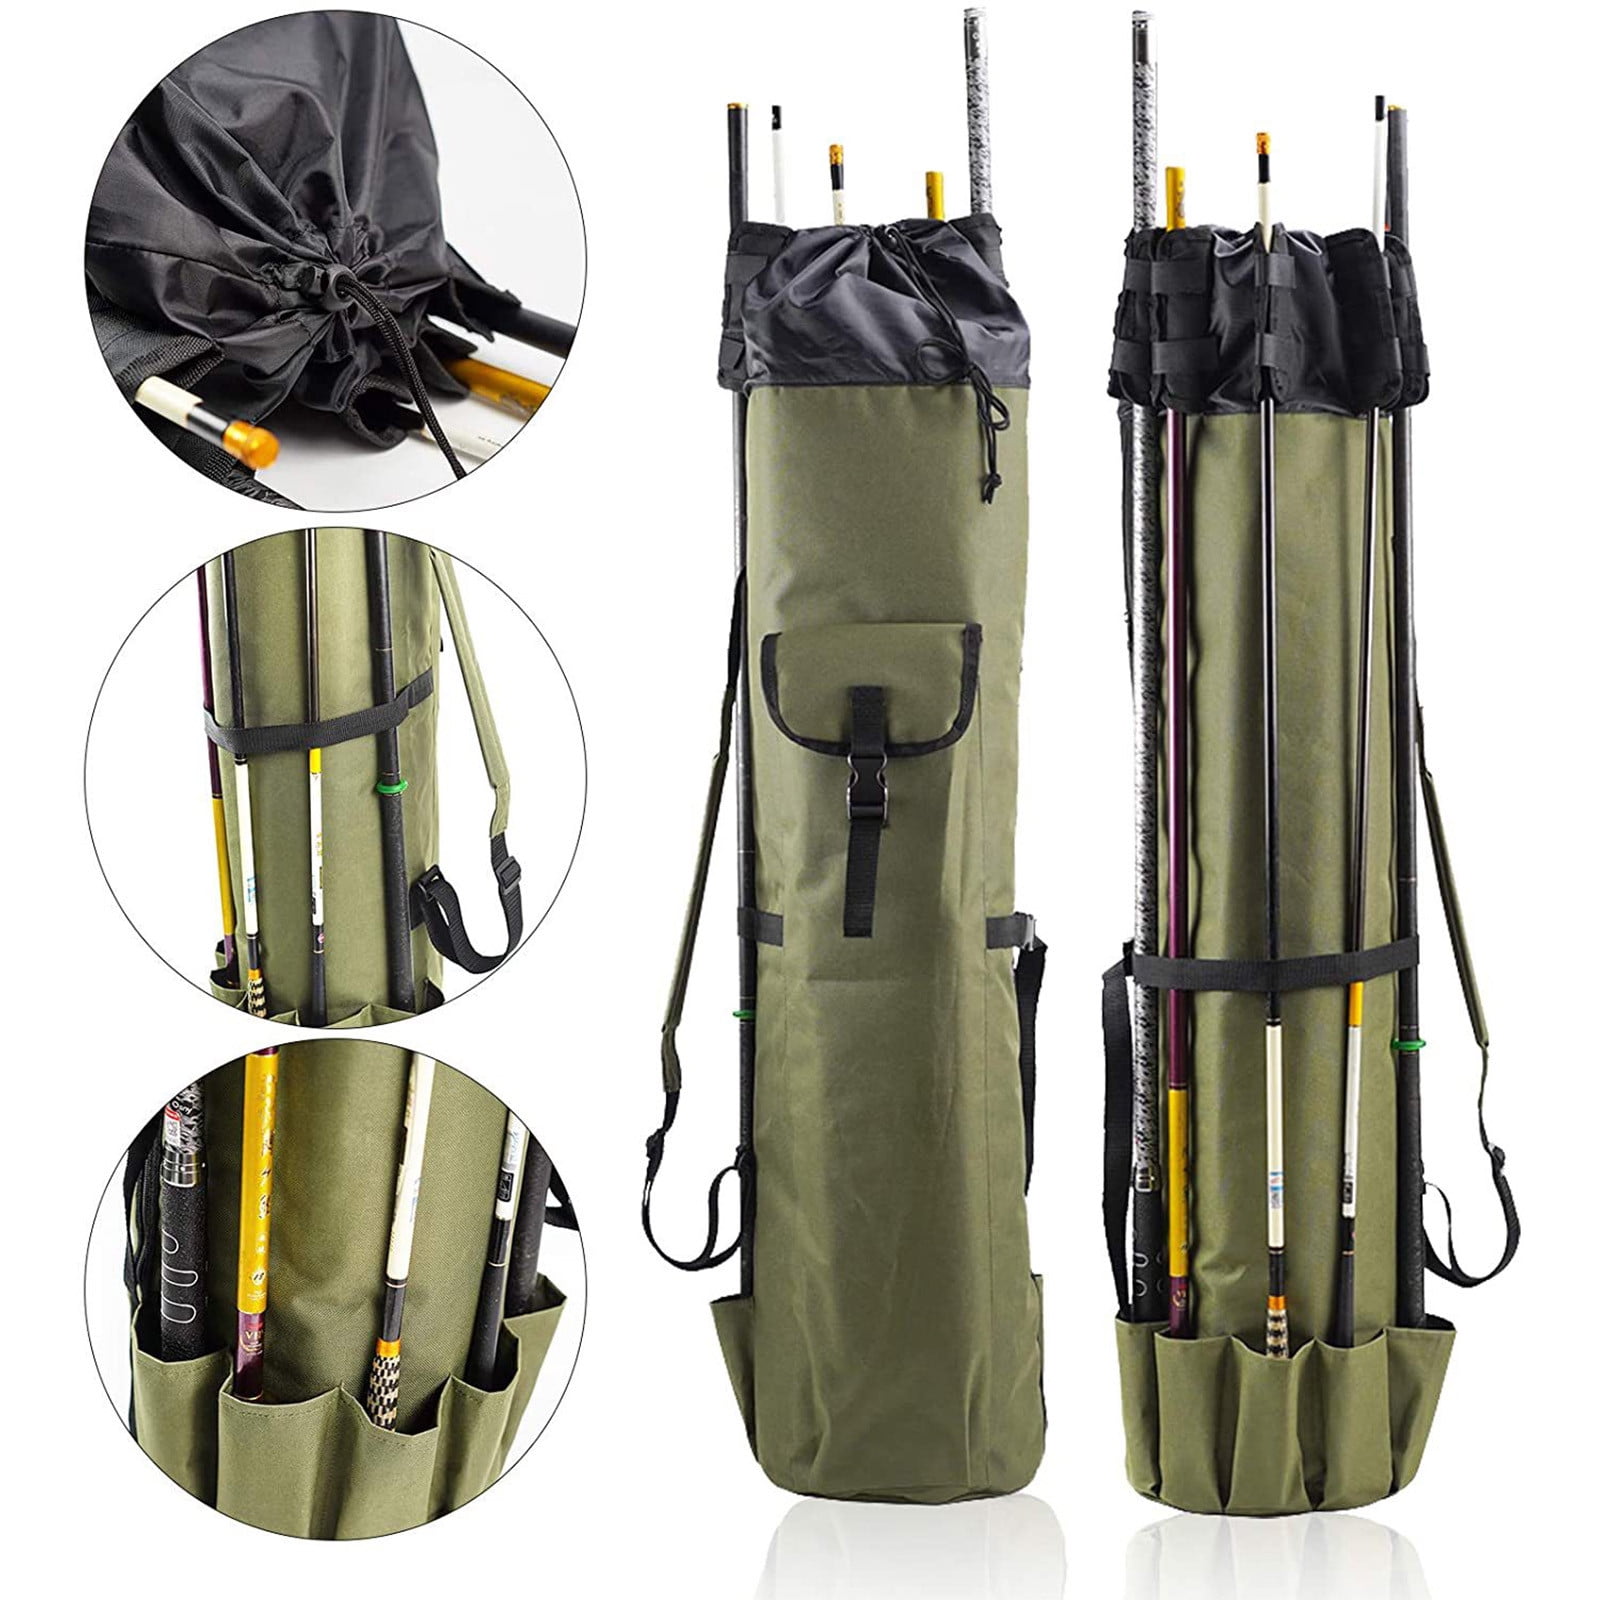 Fishing Rod Case Waterproof Pole Carry Bag Hard Sided Protected Travel Rack